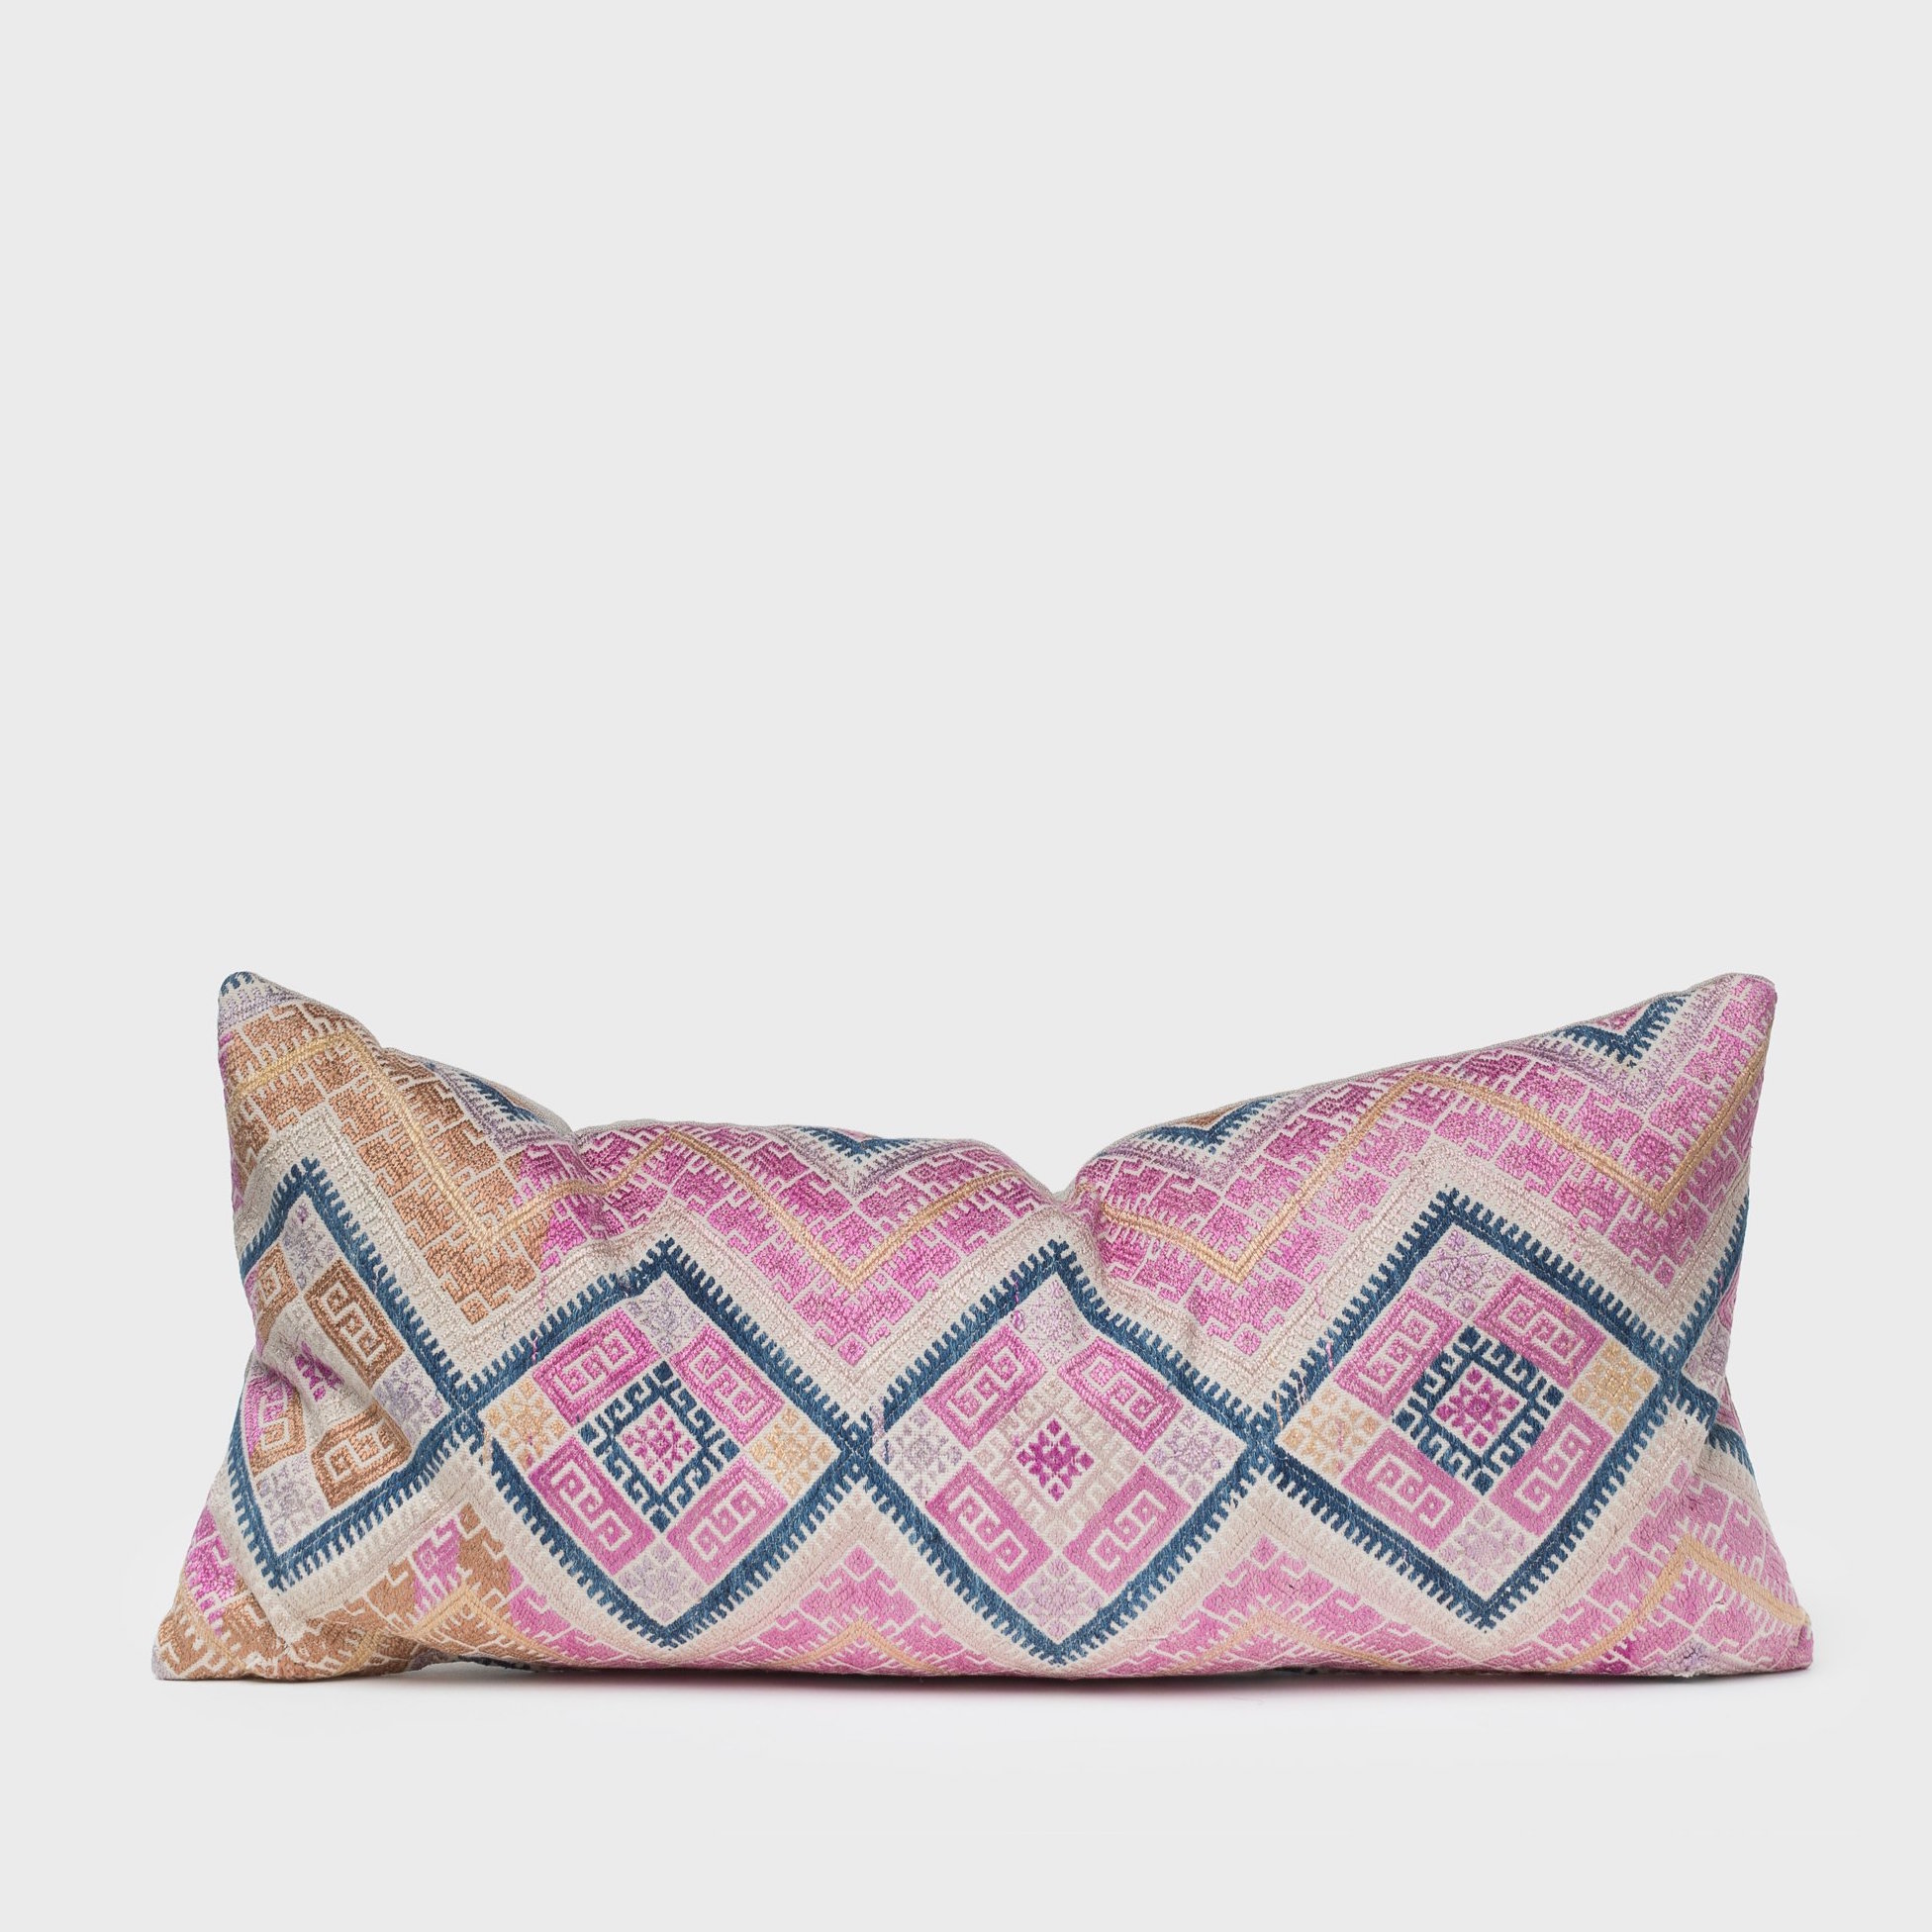 ALL-SORTS-OF-SHOPPE-TARQUINIA-PILLOW